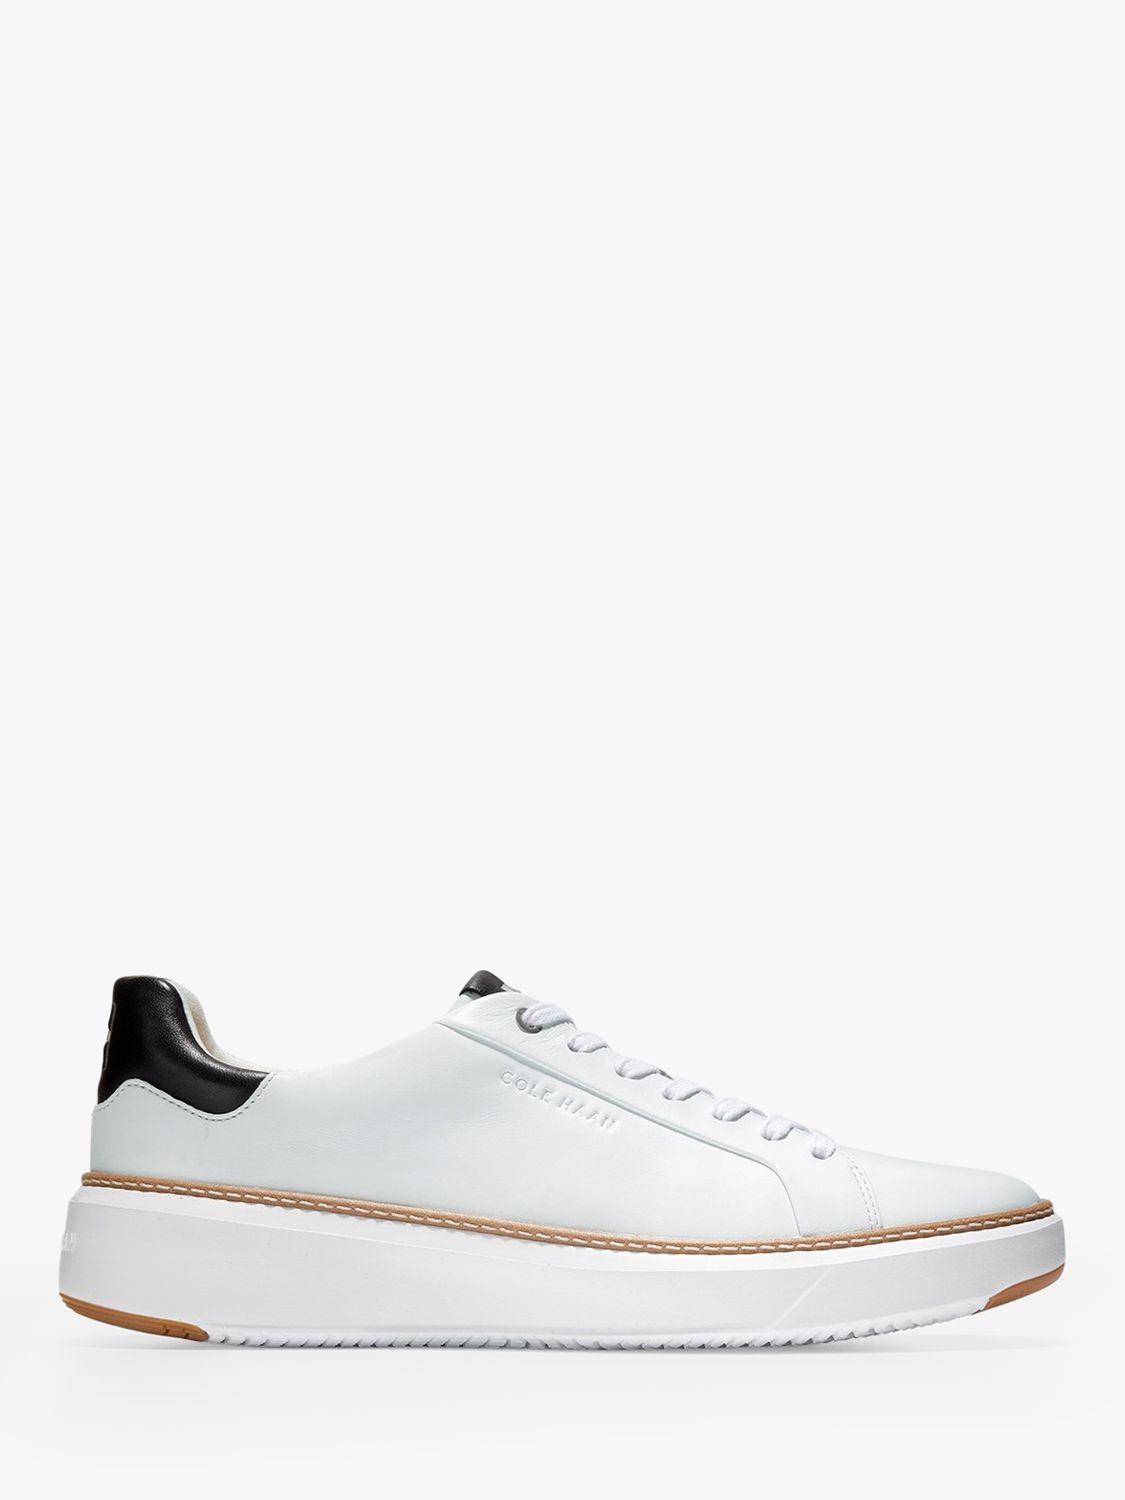 Cole Haan Grand Pro Topspin Tennis Trainers, White at John Lewis & Partners